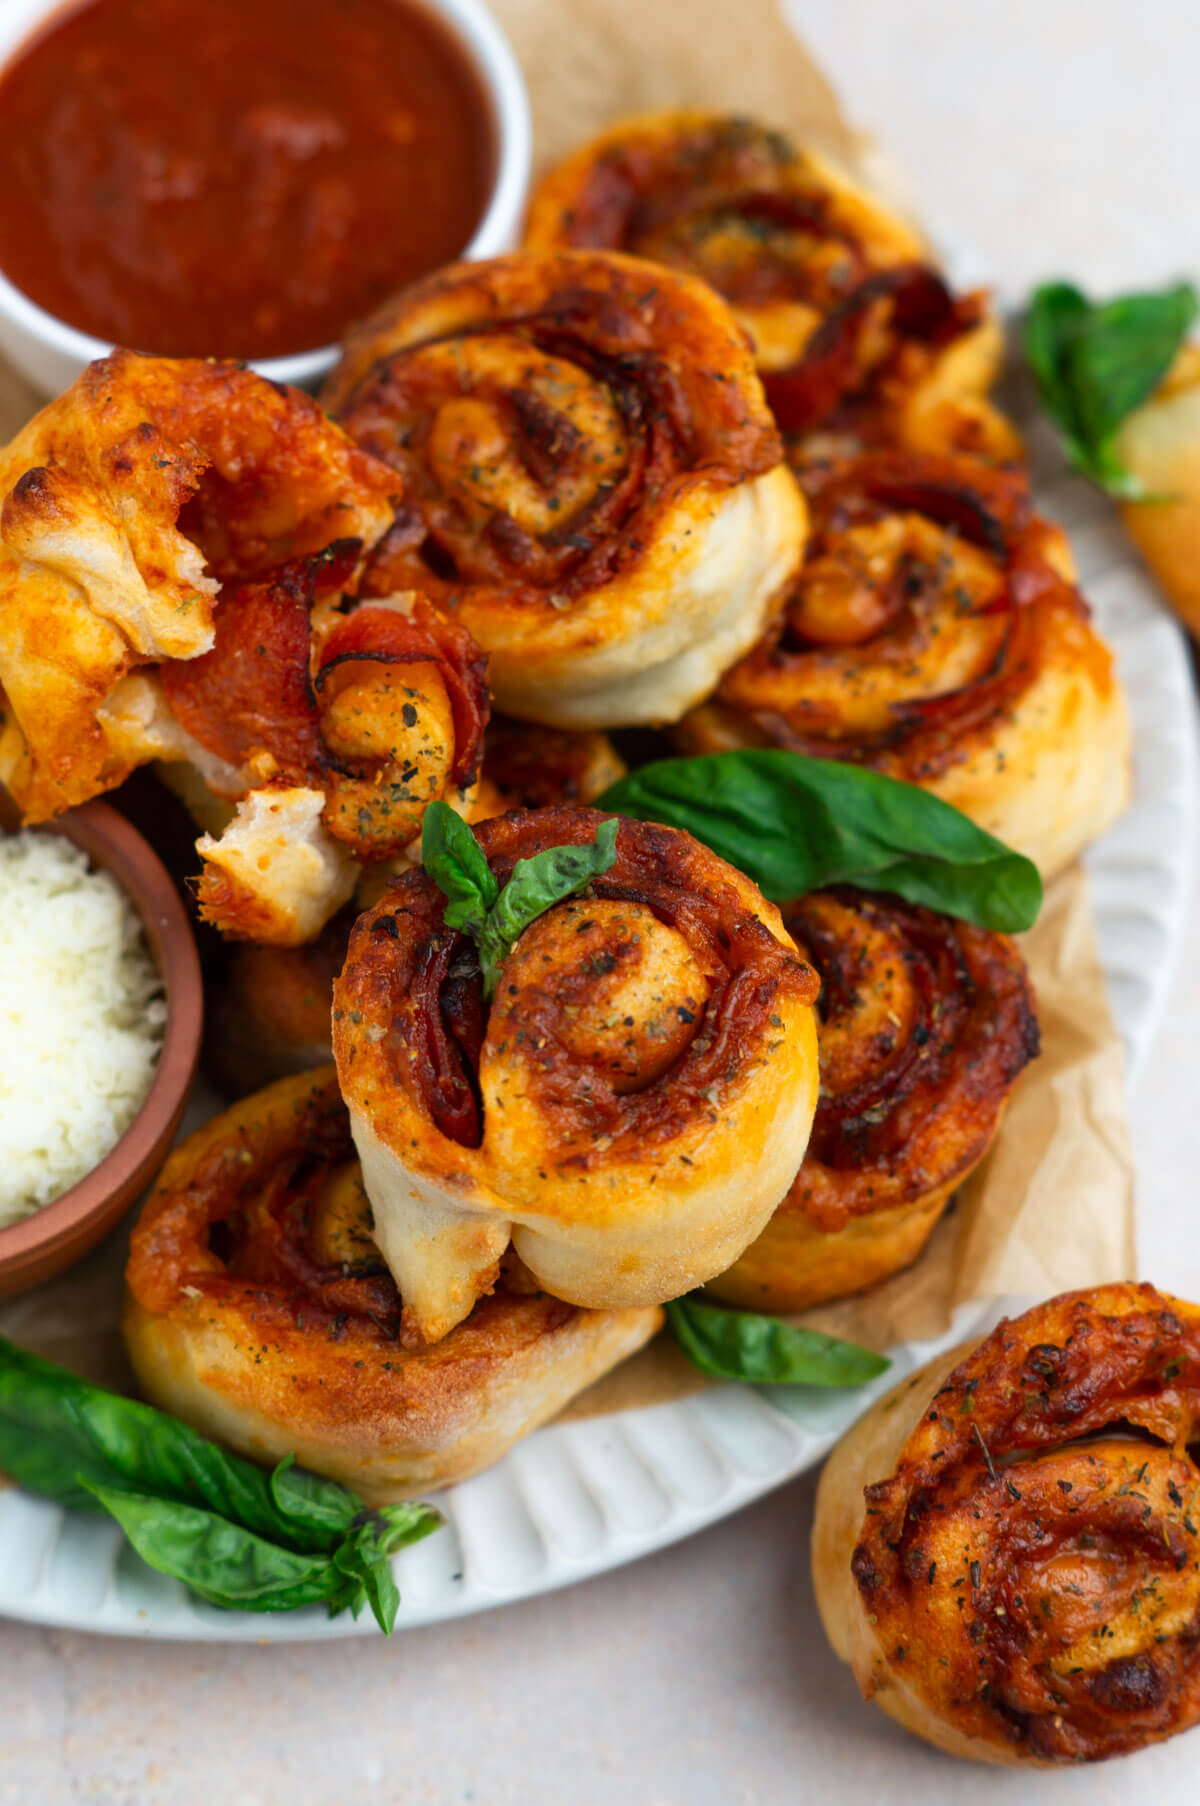 A platter stacked with homemade air fryer pizza rolls with a bowl of marinara sauce, parmesan cheese, and a garnish of basil leaves.